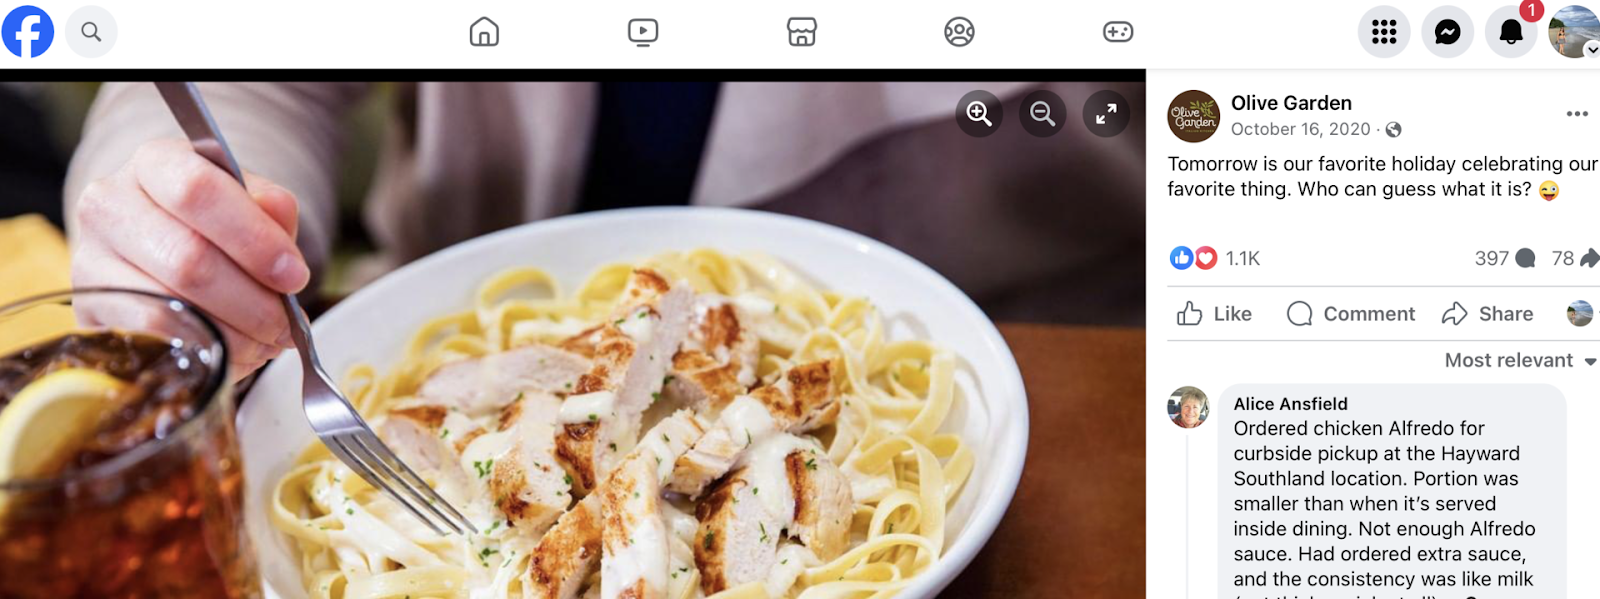 Olive Garden facebook post to celebrate National Pasta Day